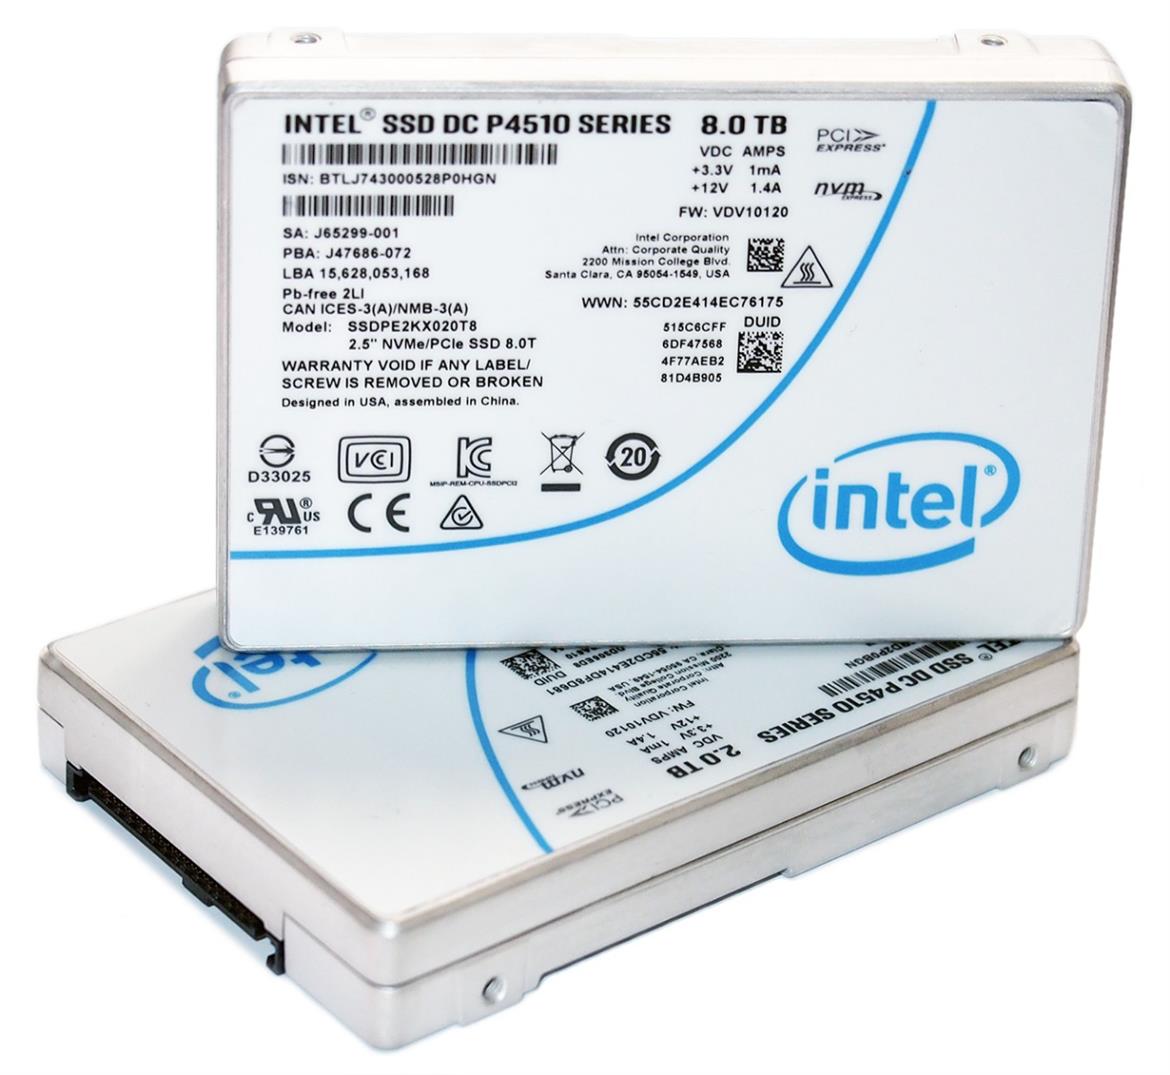 Intel SSD DC P4510 NVMe PCIe Review: Blistering 3GB/s Transfers, With Low Latency